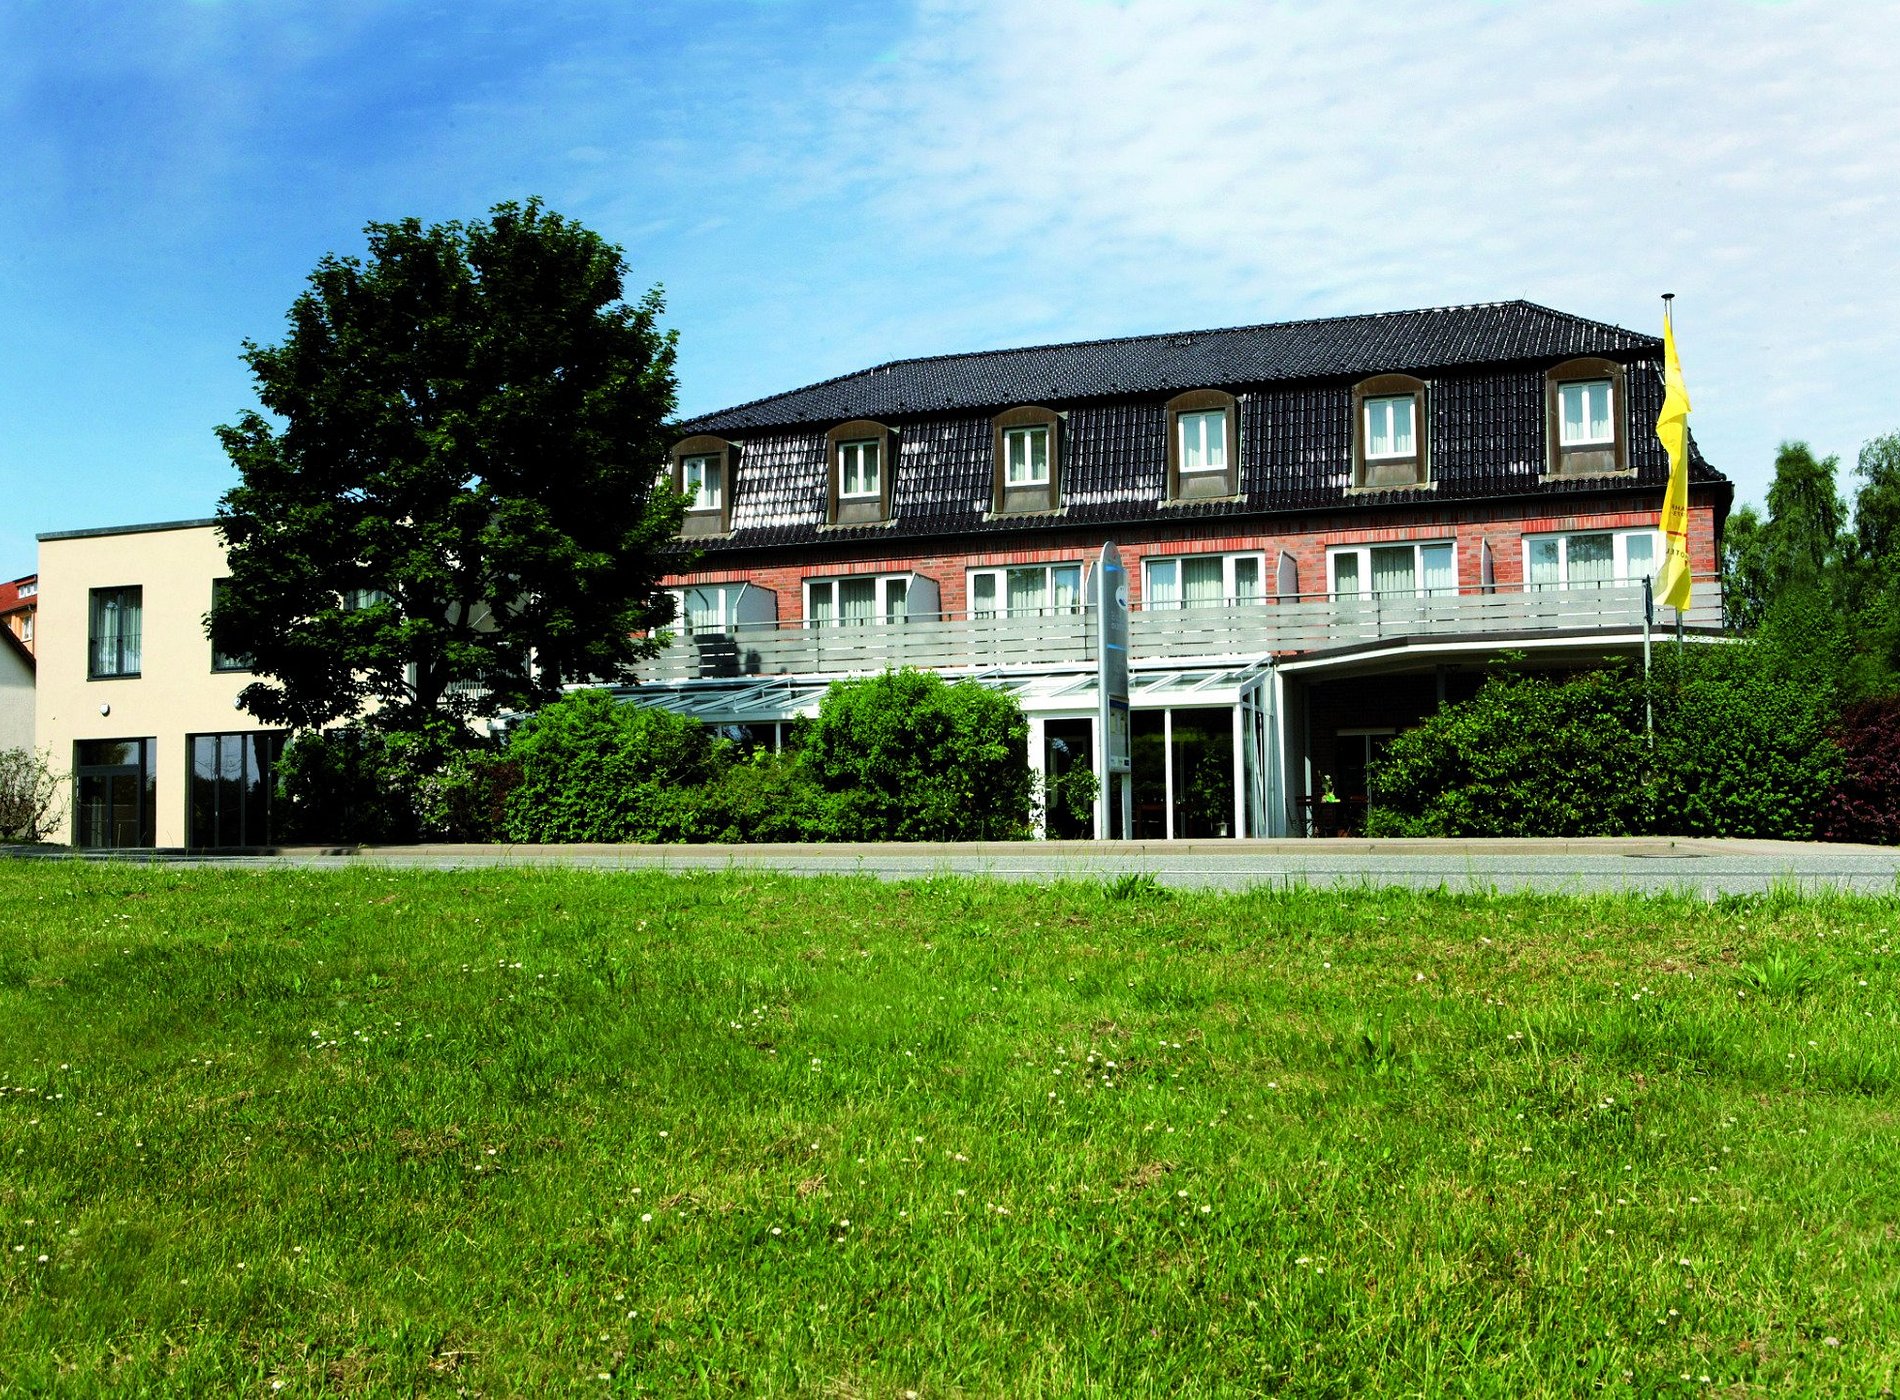 Ringhotel am See image